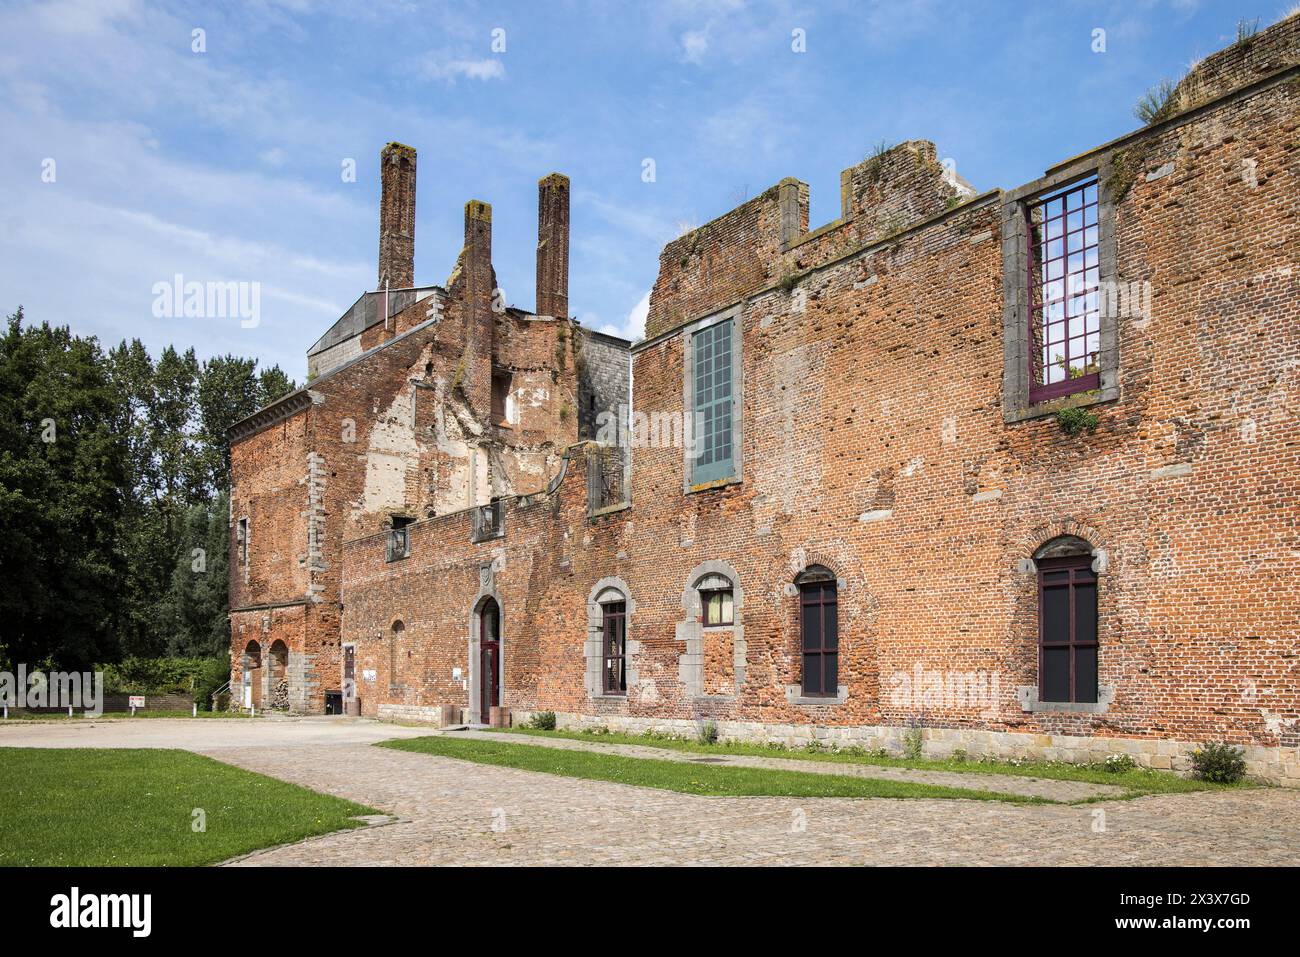 Ruined castle, Chateau d' Havre, Hainault, Wallonia, Belgium Stock Photo